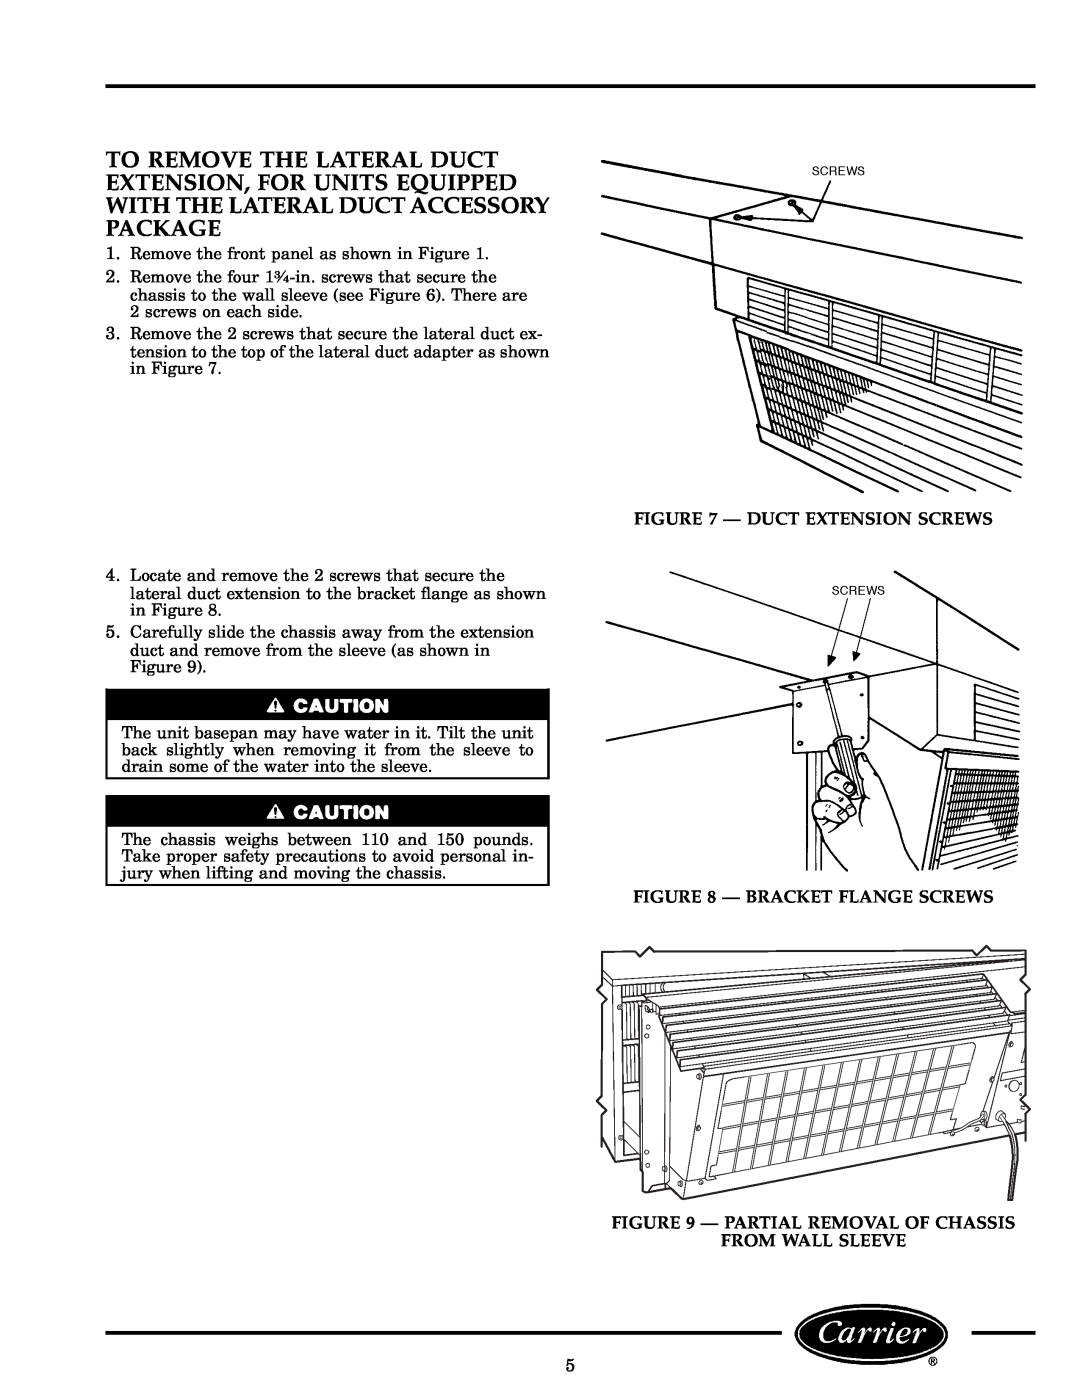 Carrier 52S manual To Remove The Lateral Duct, Extension, For Units Equipped, With The Lateral Duct Accessory Package 